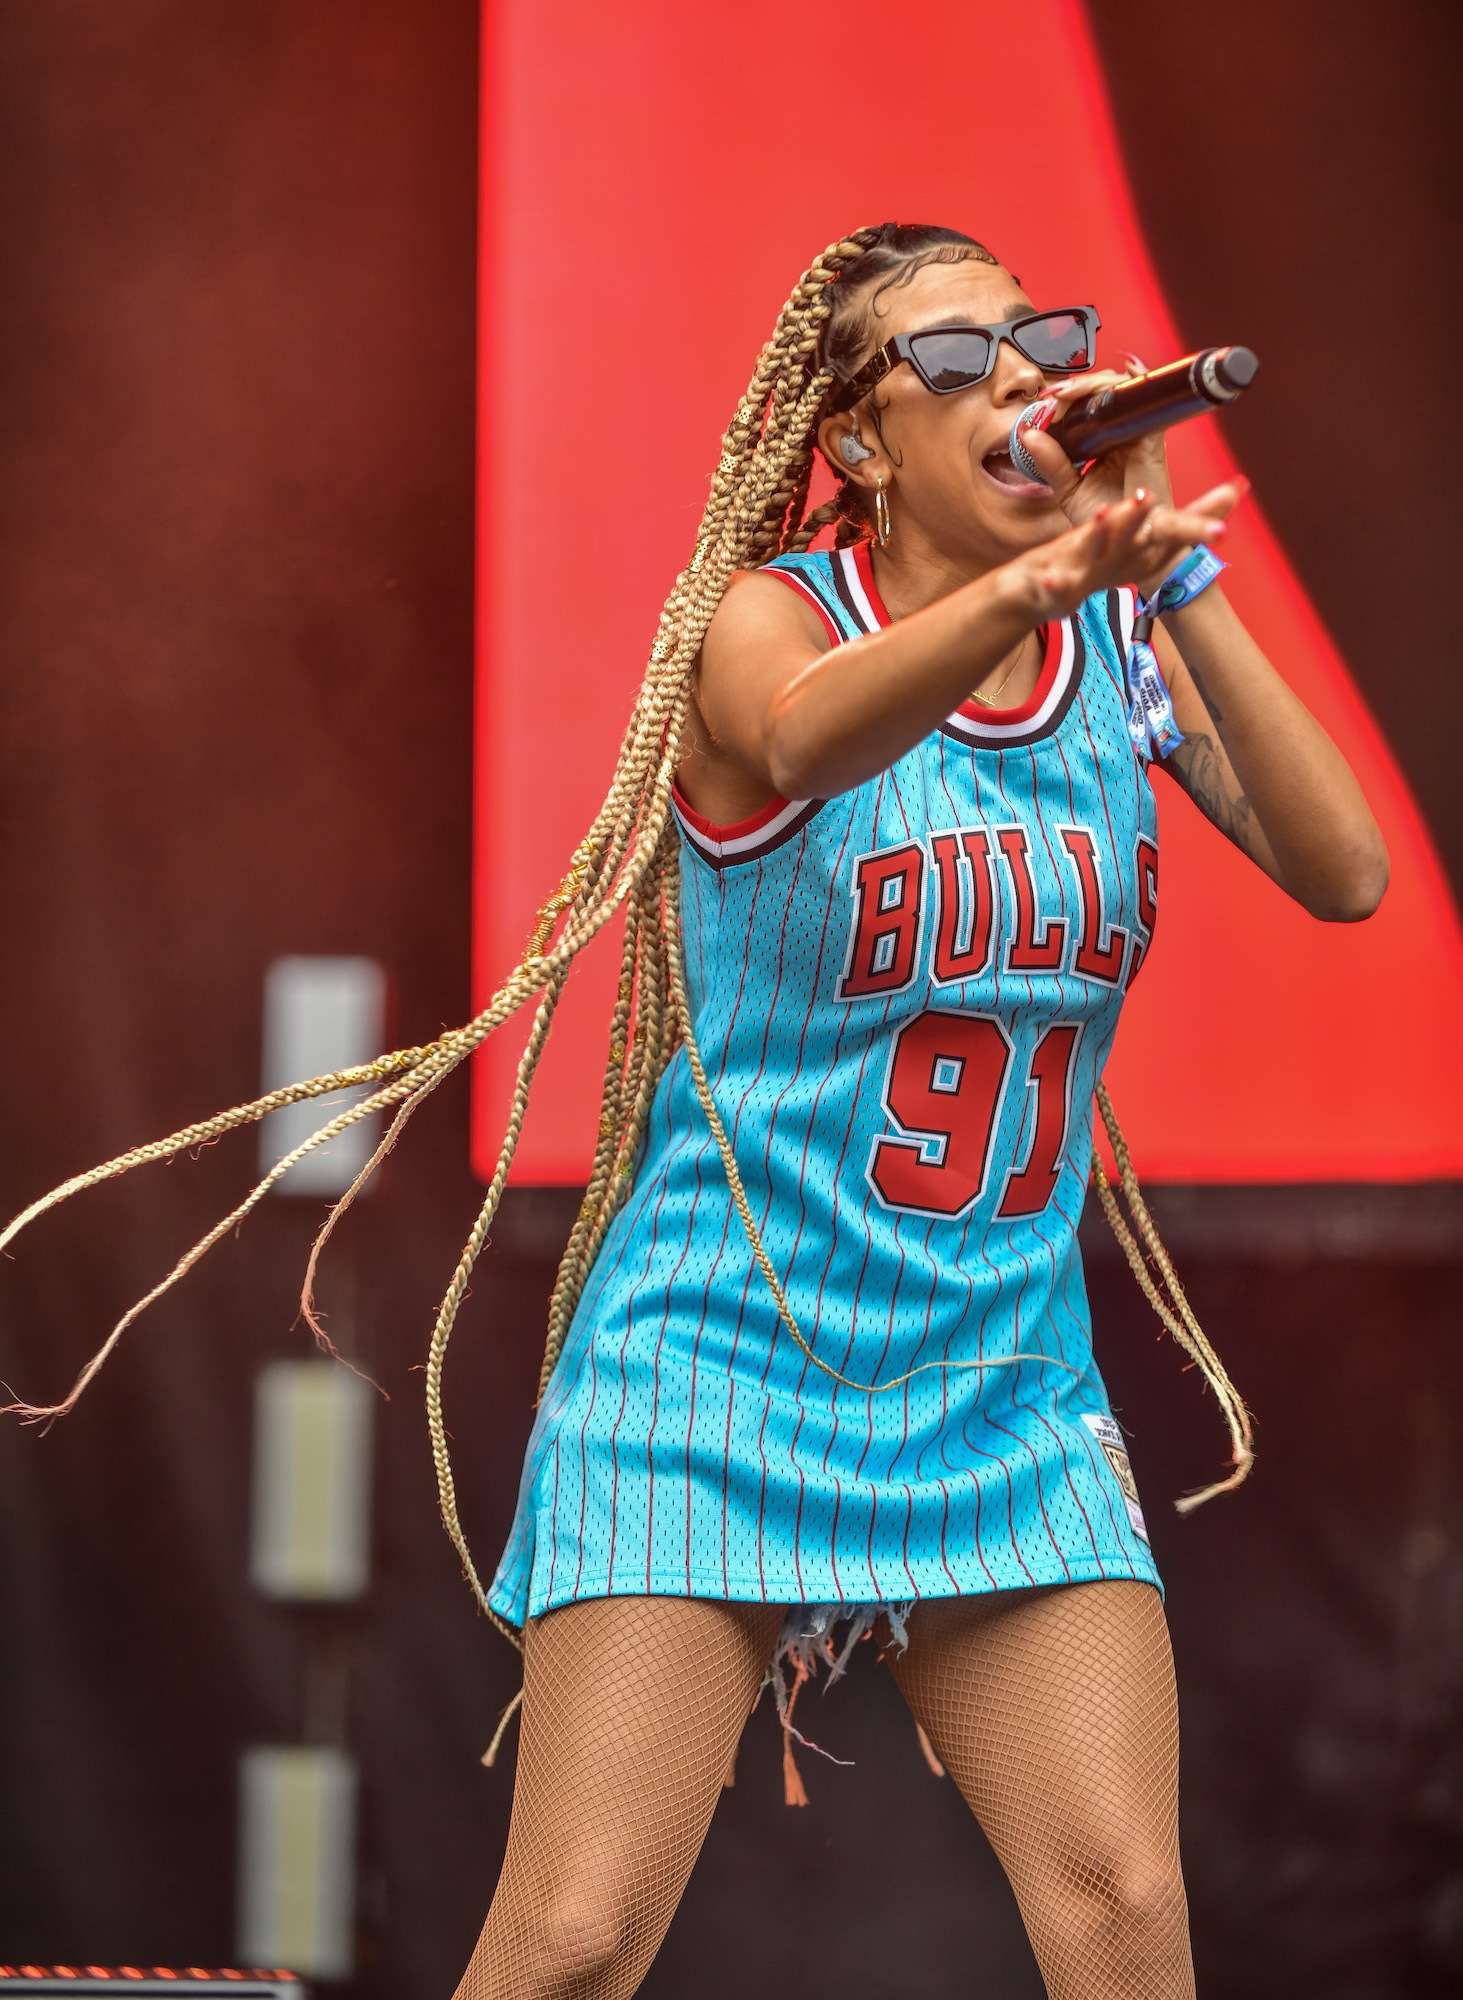 Emotional Oranges Live at Lollapalooza [GALLERY] 8